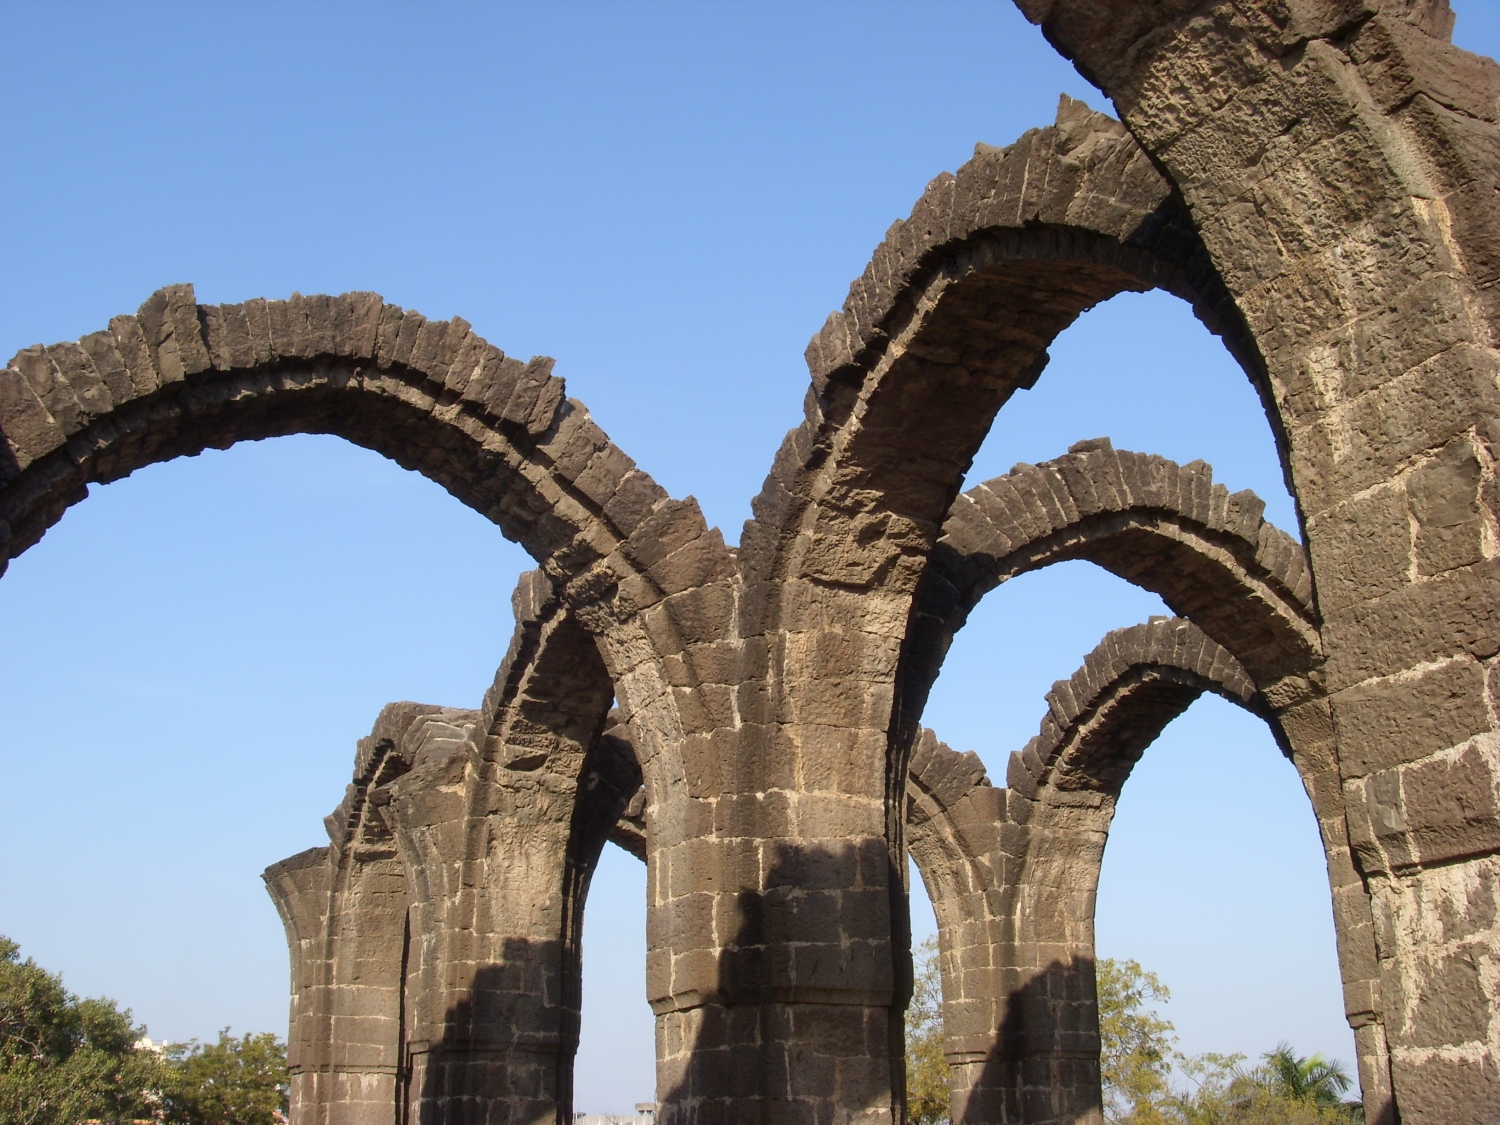 Detail view showing intersection of arches